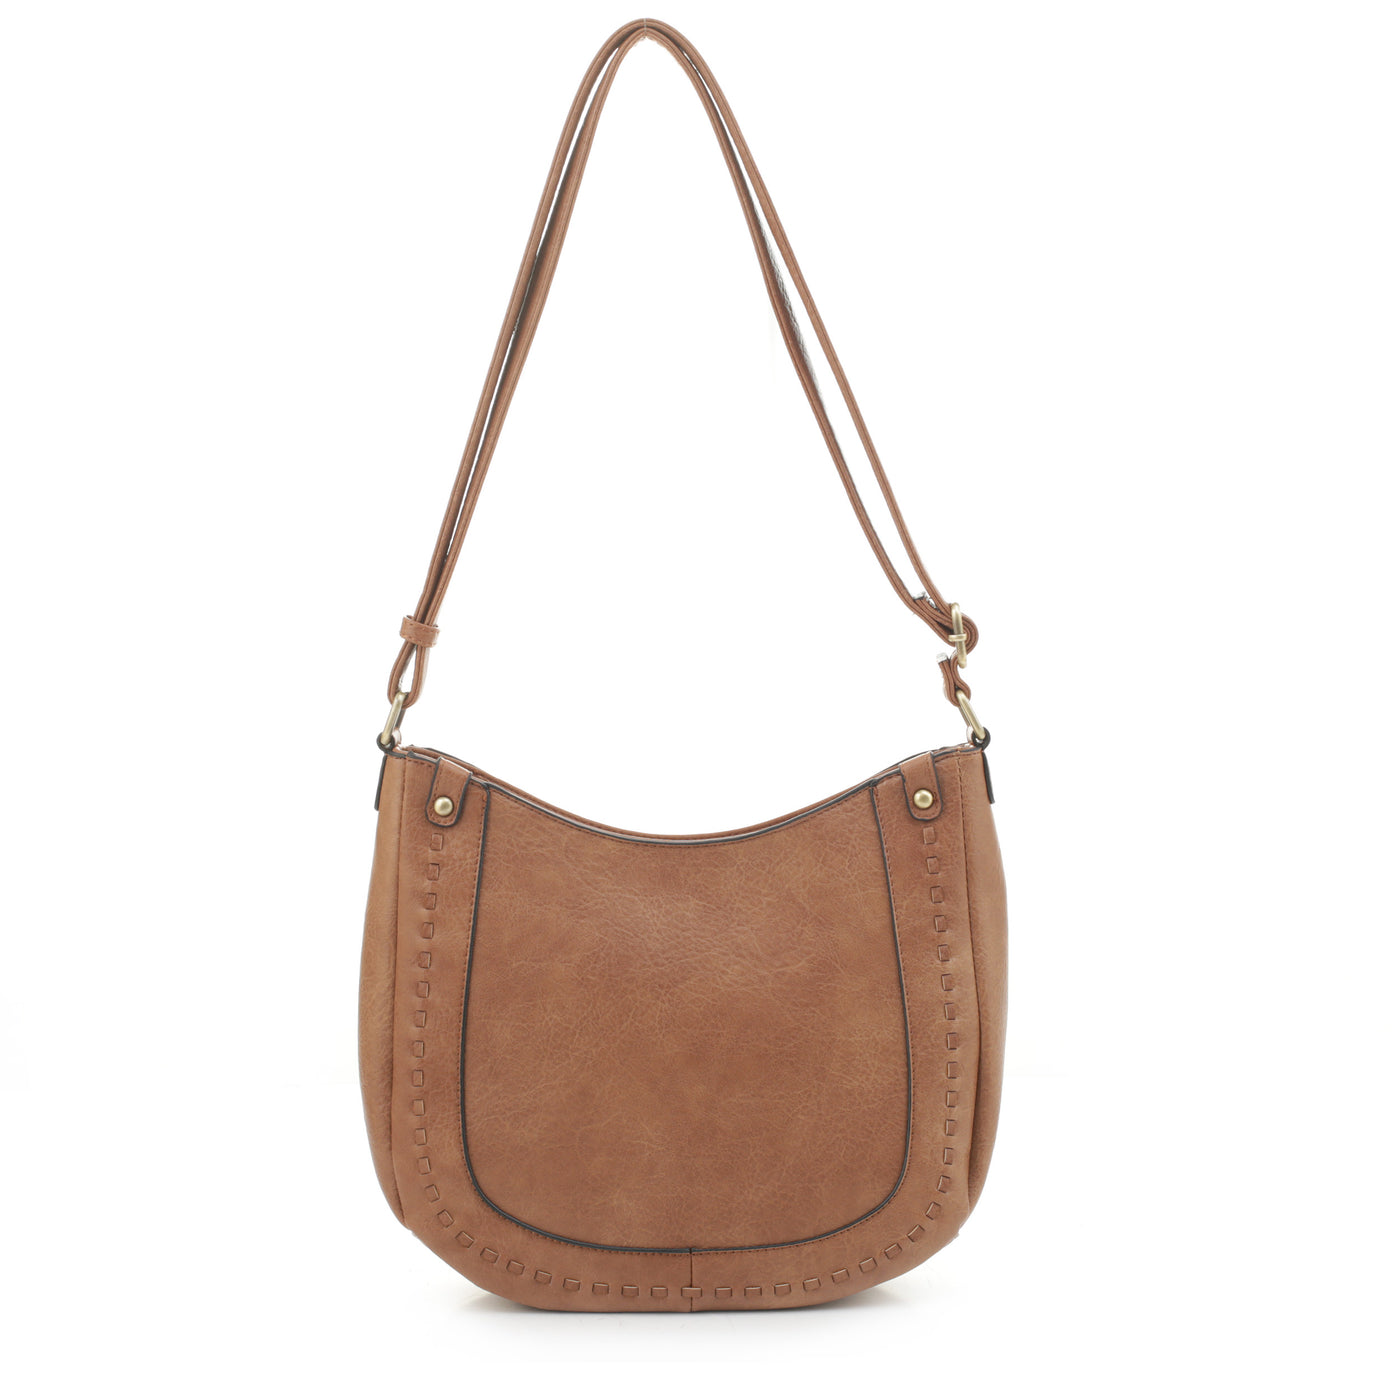 Emily Concealed Carry Hobo with Whipstitch